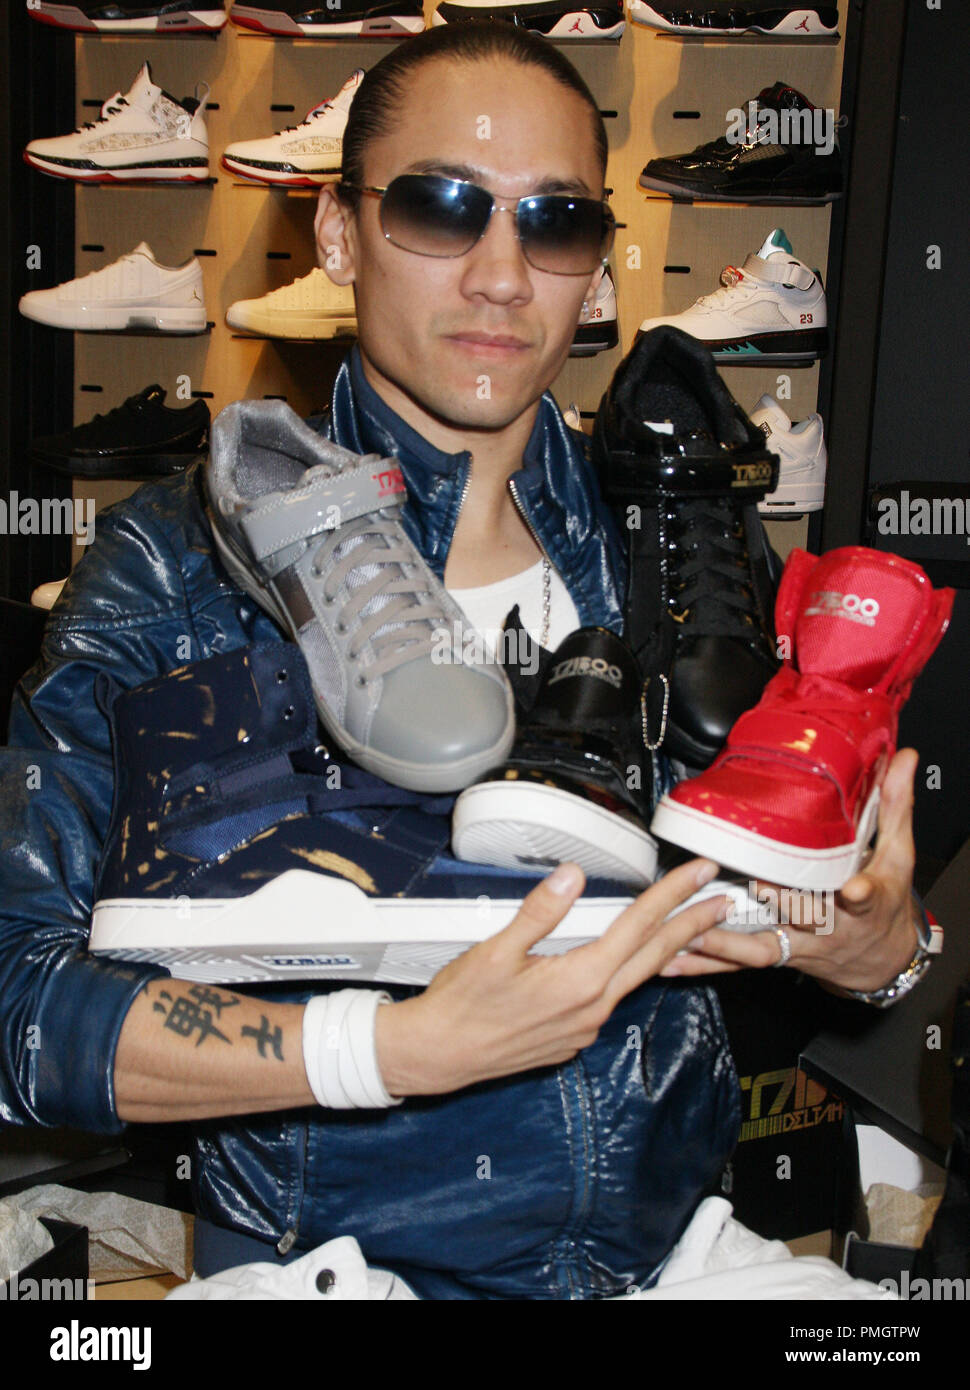 Taboo at the Taboo Deltah 3008 meet and greet autograph signing held at FootAction Westfield Culver City in Culver City, CA on Thursday, August 26, 2010. Photo by Peter Gonzaga Pacific Rim Photo Press /PictureLux File Reference # 30448 007PRPP   For Editorial Use Only -  All Rights Reserved Stock Photo